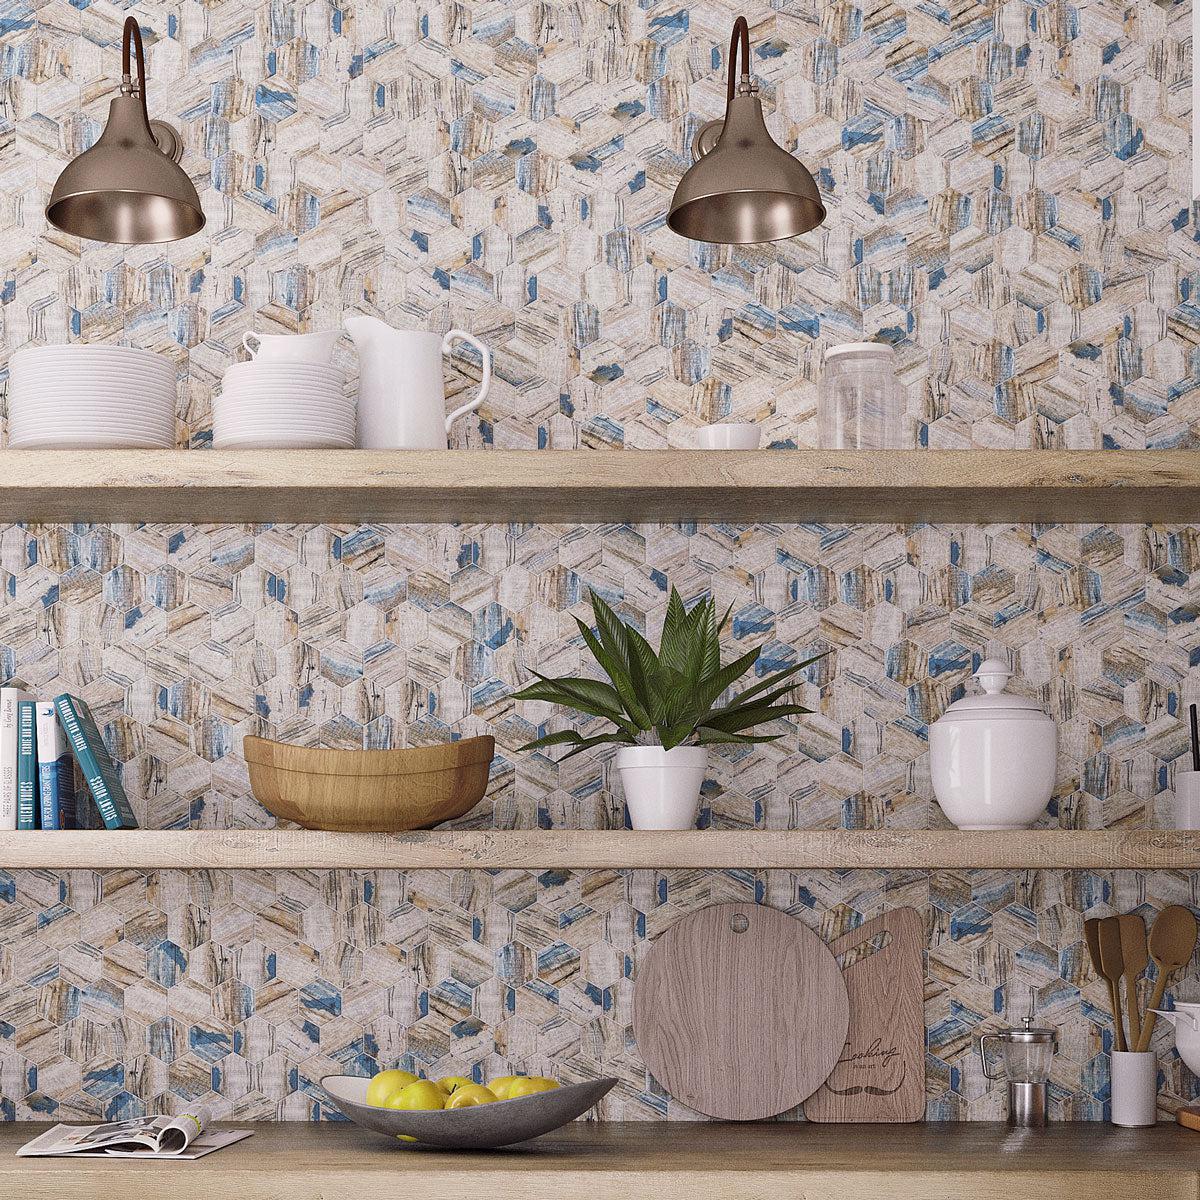 Hexagon mosaic tile backsplash with recycled glass tiles in blue wood color